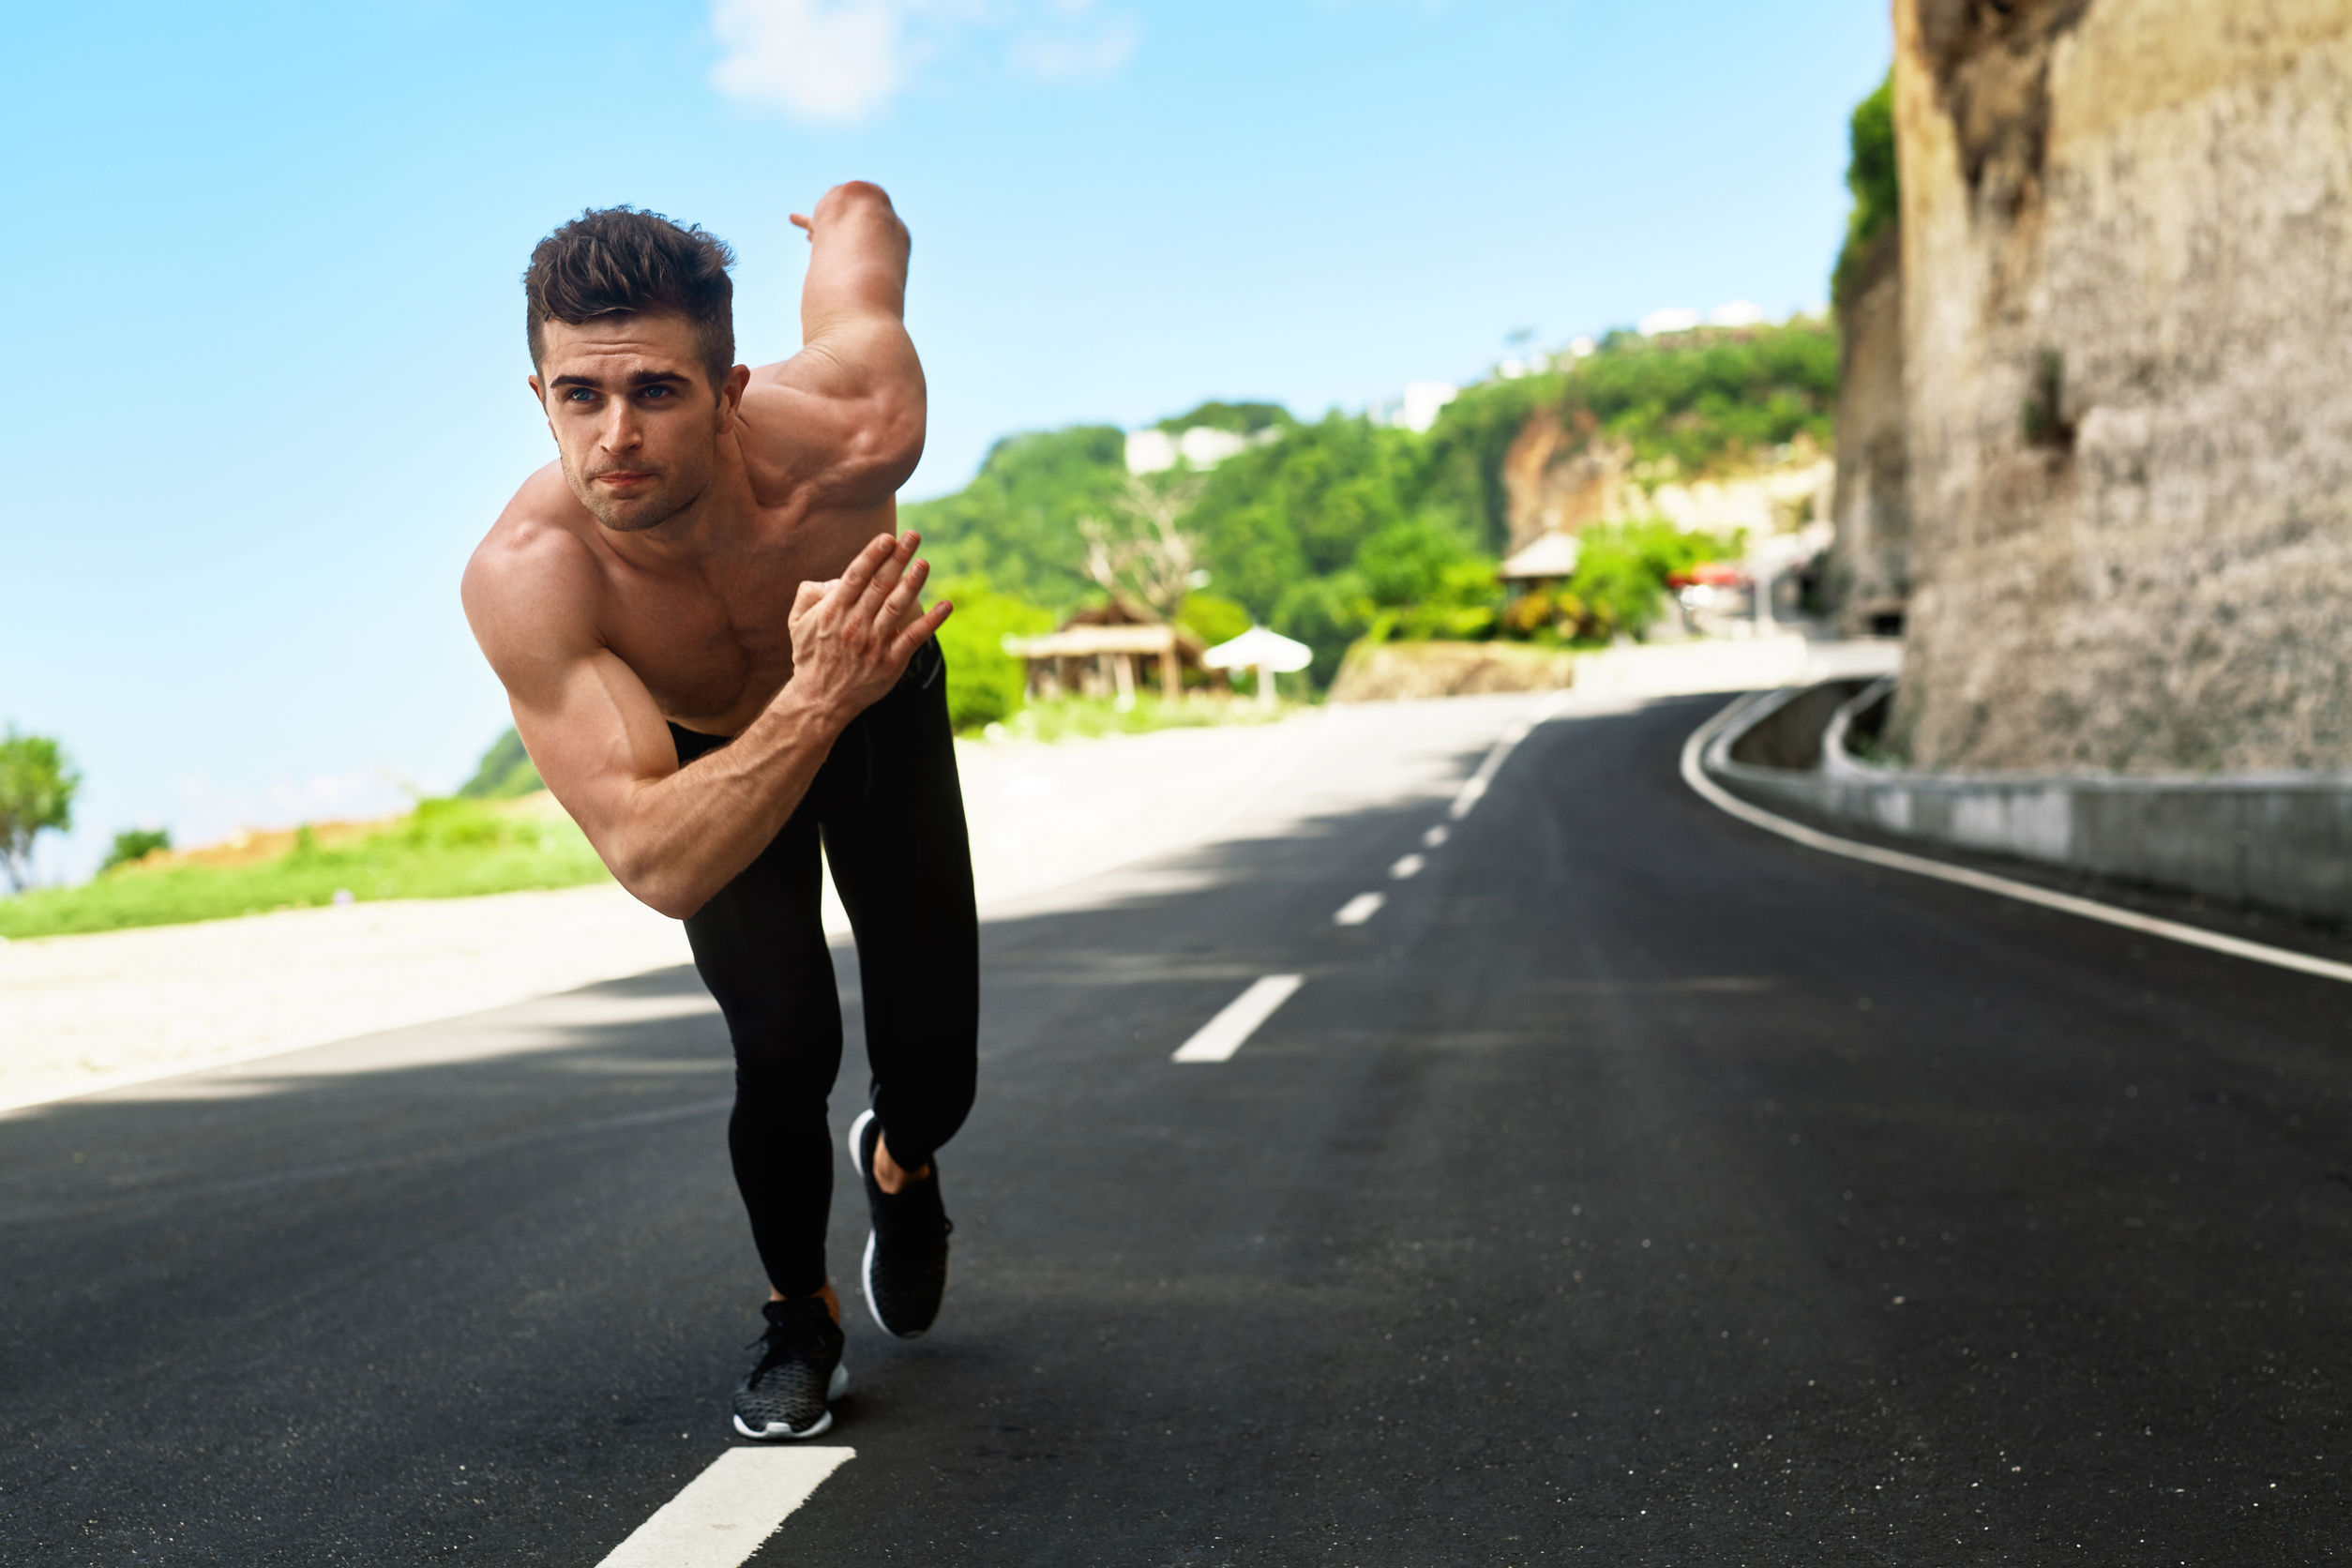 57159660 - athletics. athletic man with fit muscular body in starting position for running on road. handsome runner ready to start sprint race. fitness model training outdoors in summer. sports workout concept